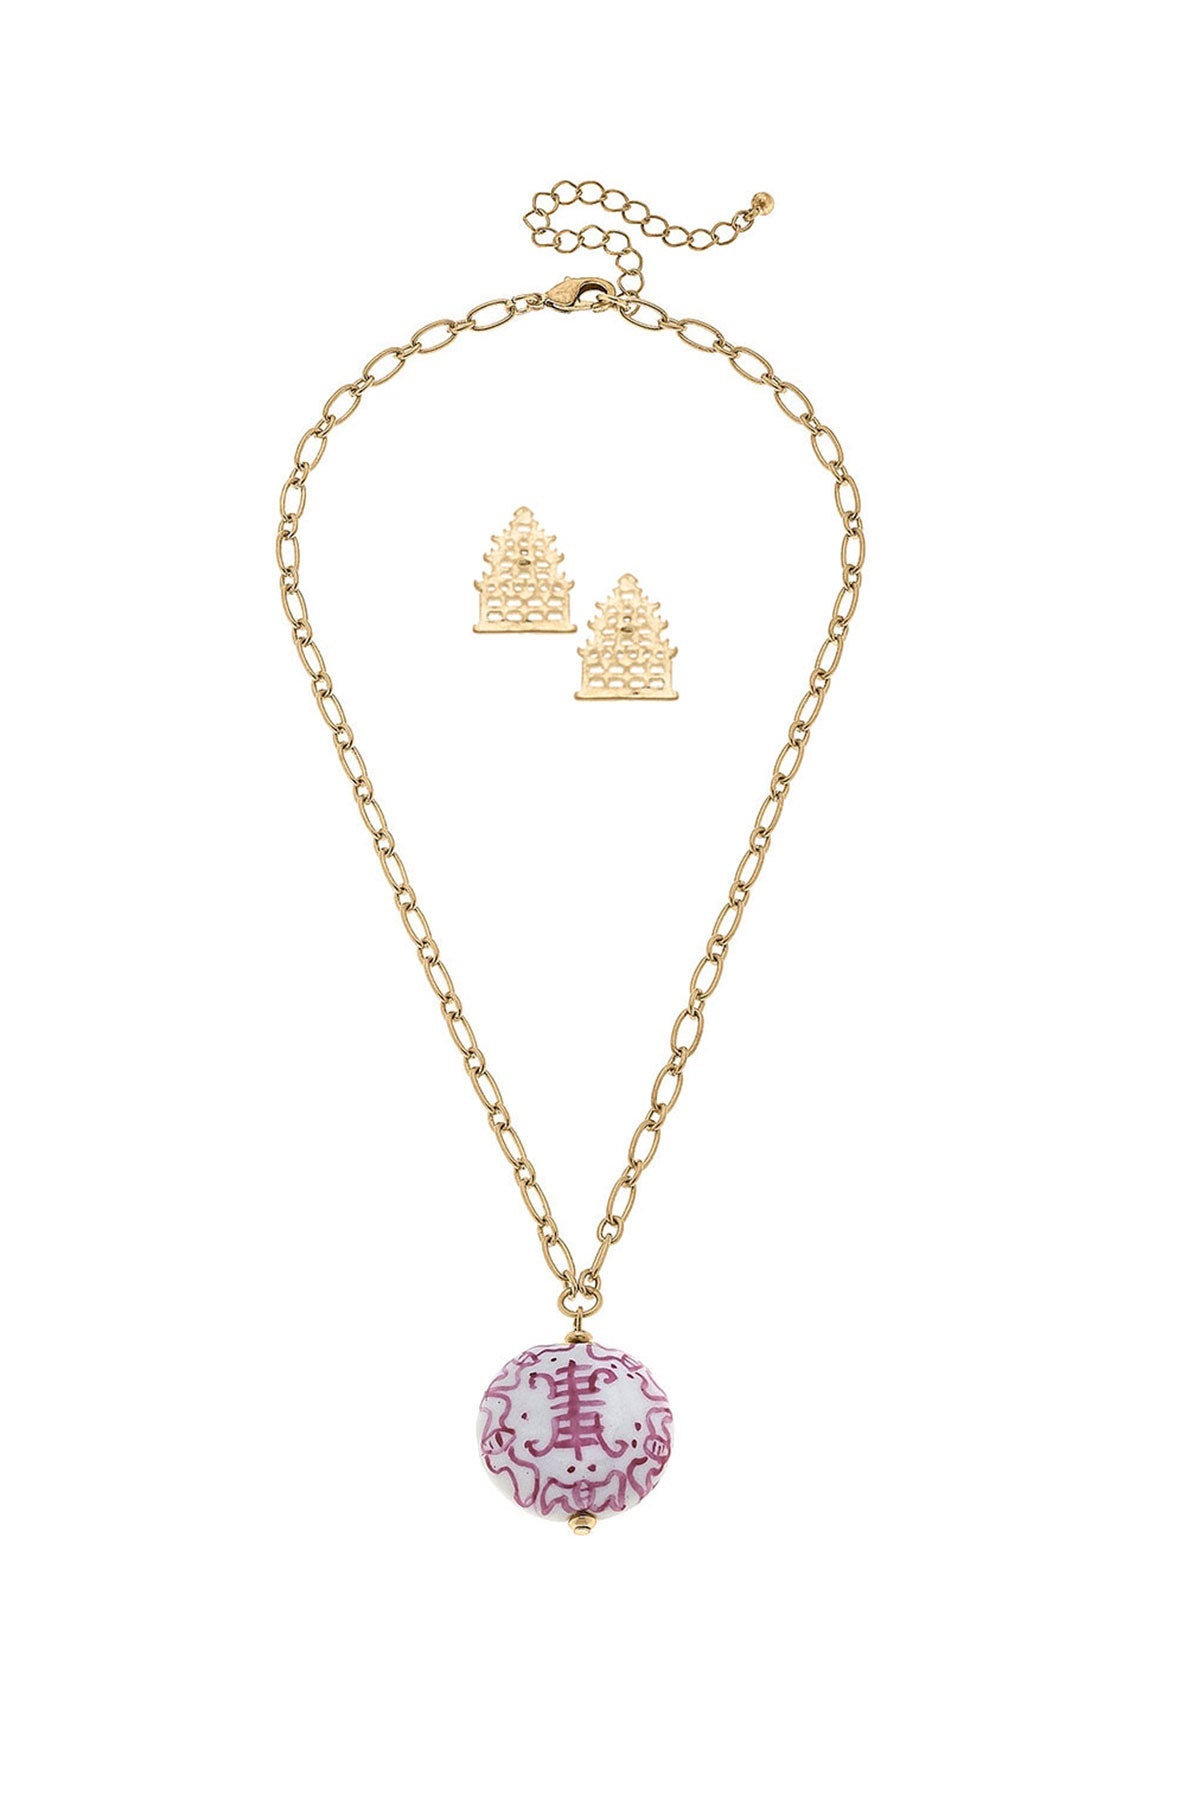 Pagoda Earring and Chinoiserie Necklace Set in Pink & White